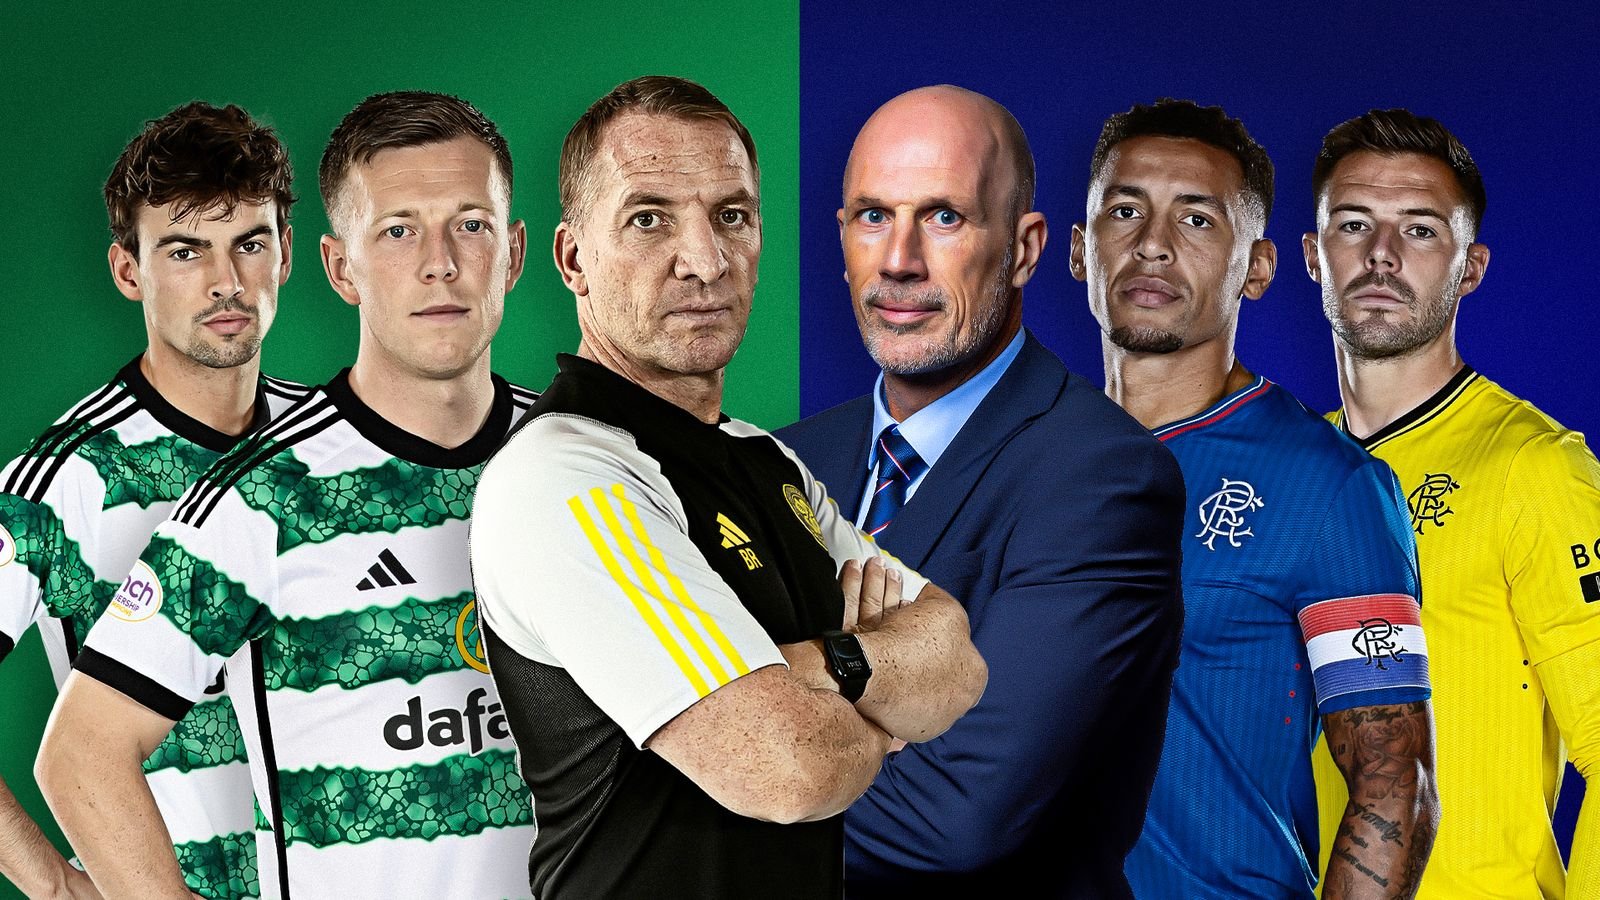 Scottish Premiership title race: Celtic or Rangers in the driving seat? | Football News